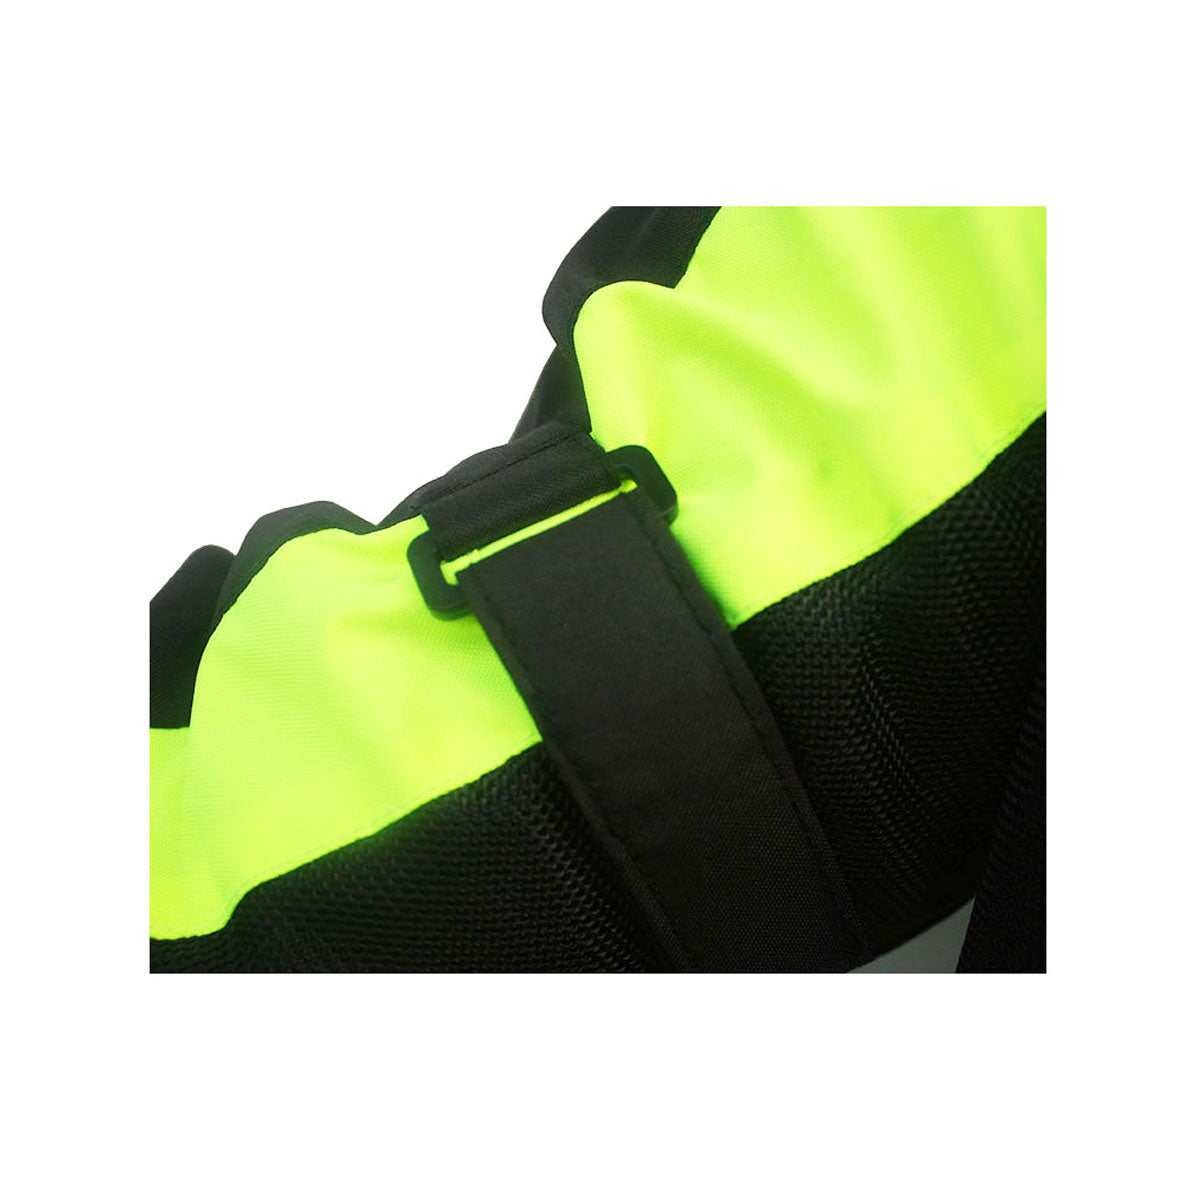 MotoTech Scrambler Air Motorcycle Riding Mesh Jacket v2 - Fluo Green (without Armours and Rain Liner)